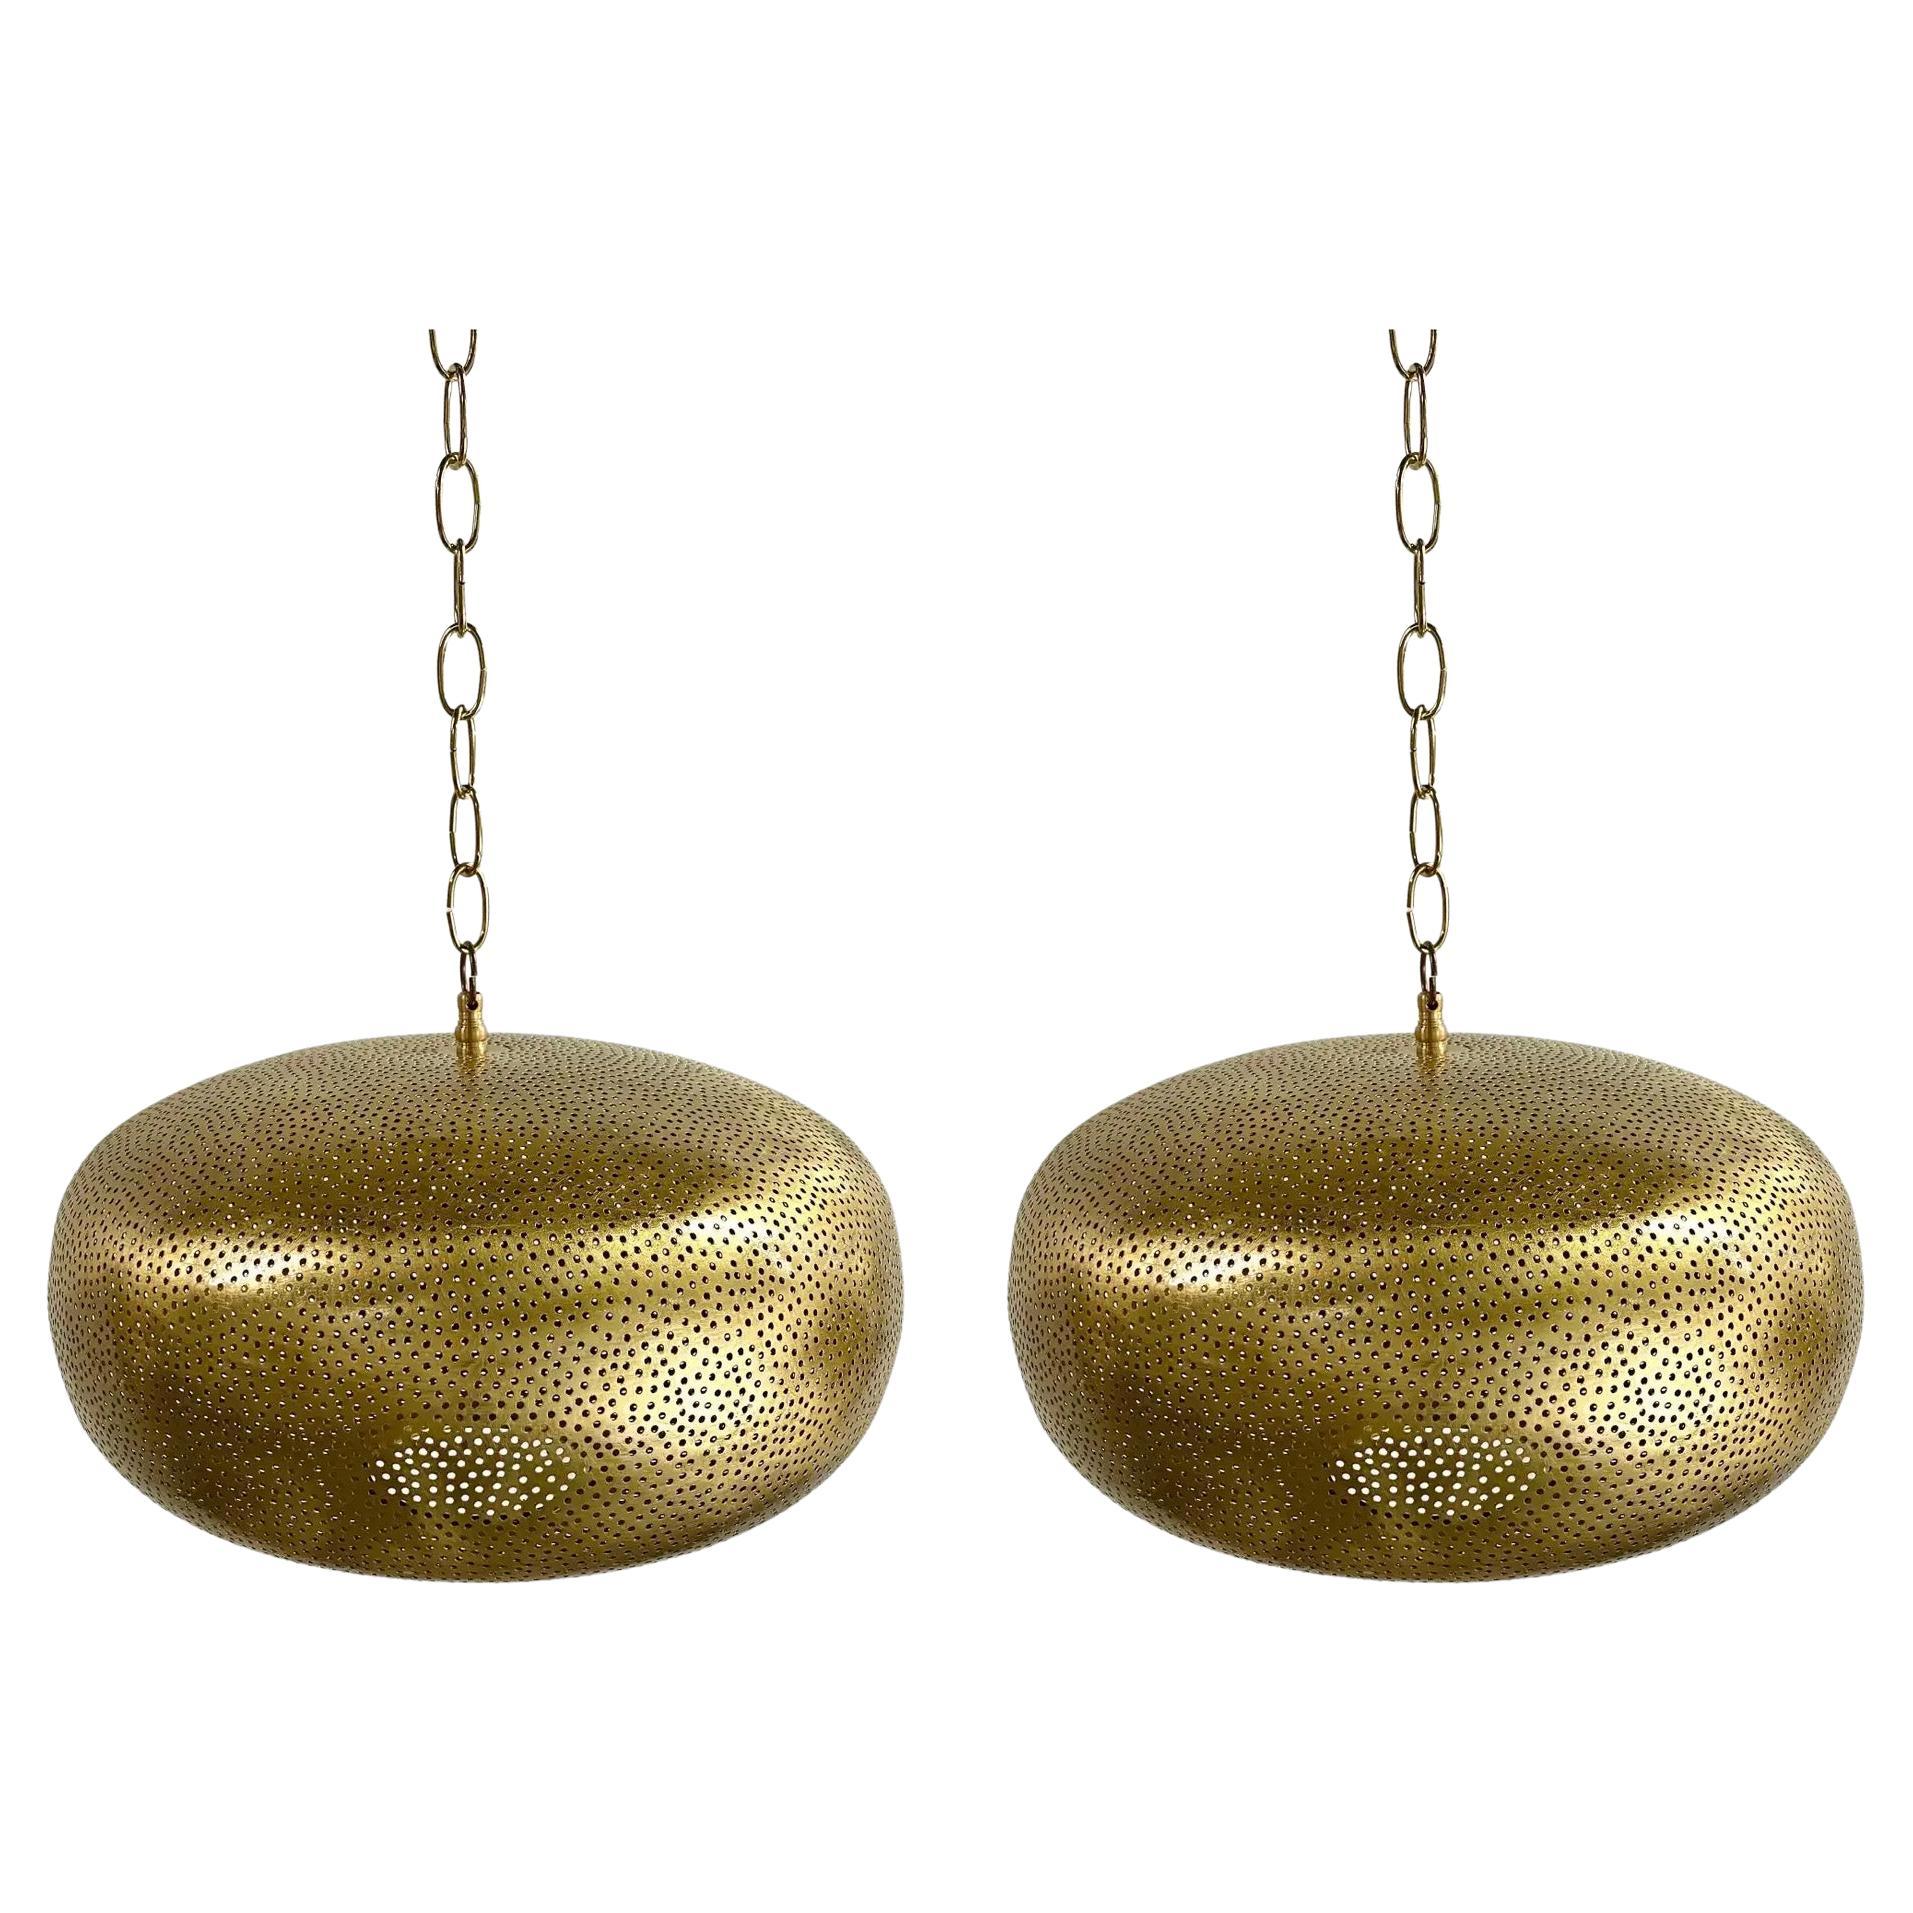 Boho Chic Style Oval Brass Pendant or Lantern, a Pair  For Sale